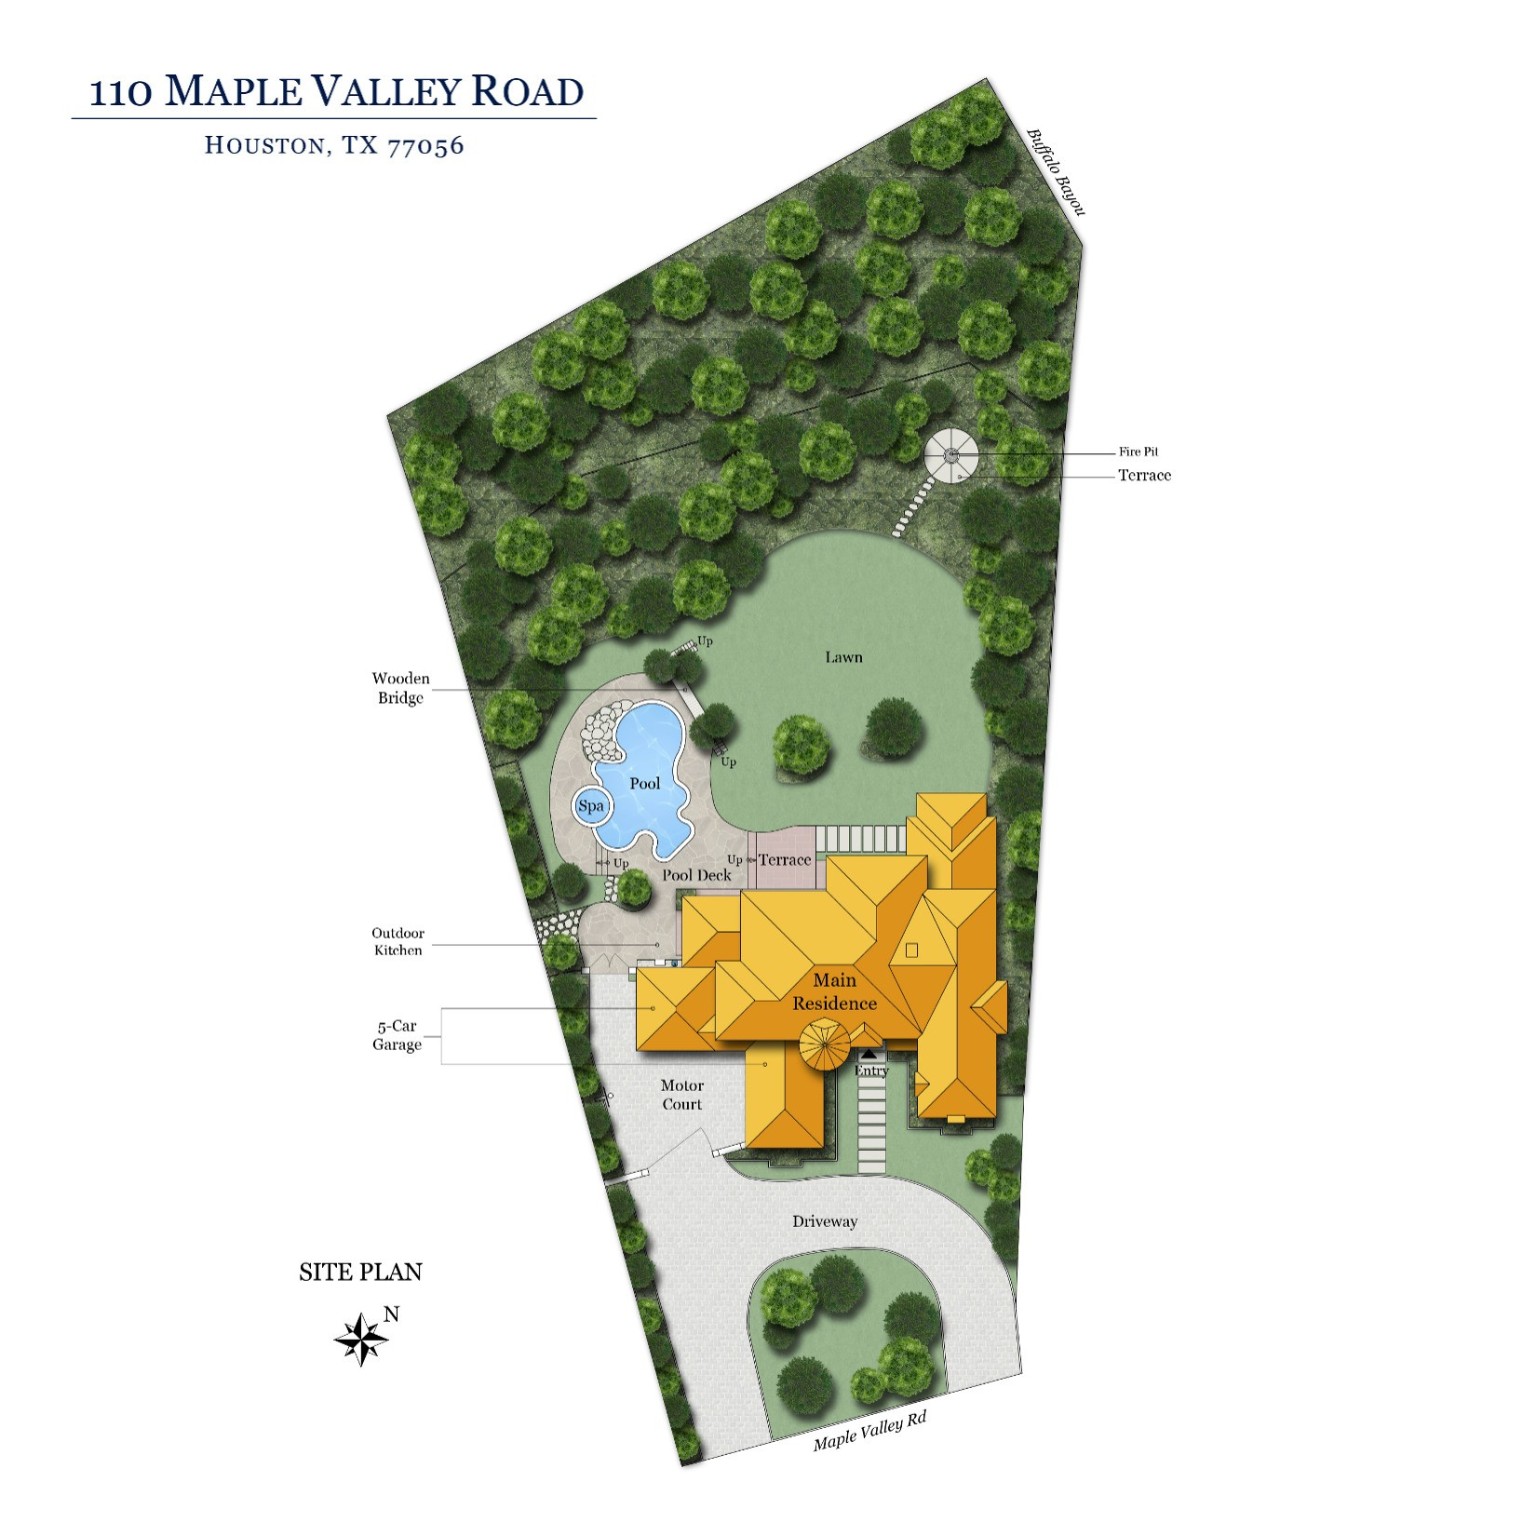 Site plan of the expansive lot